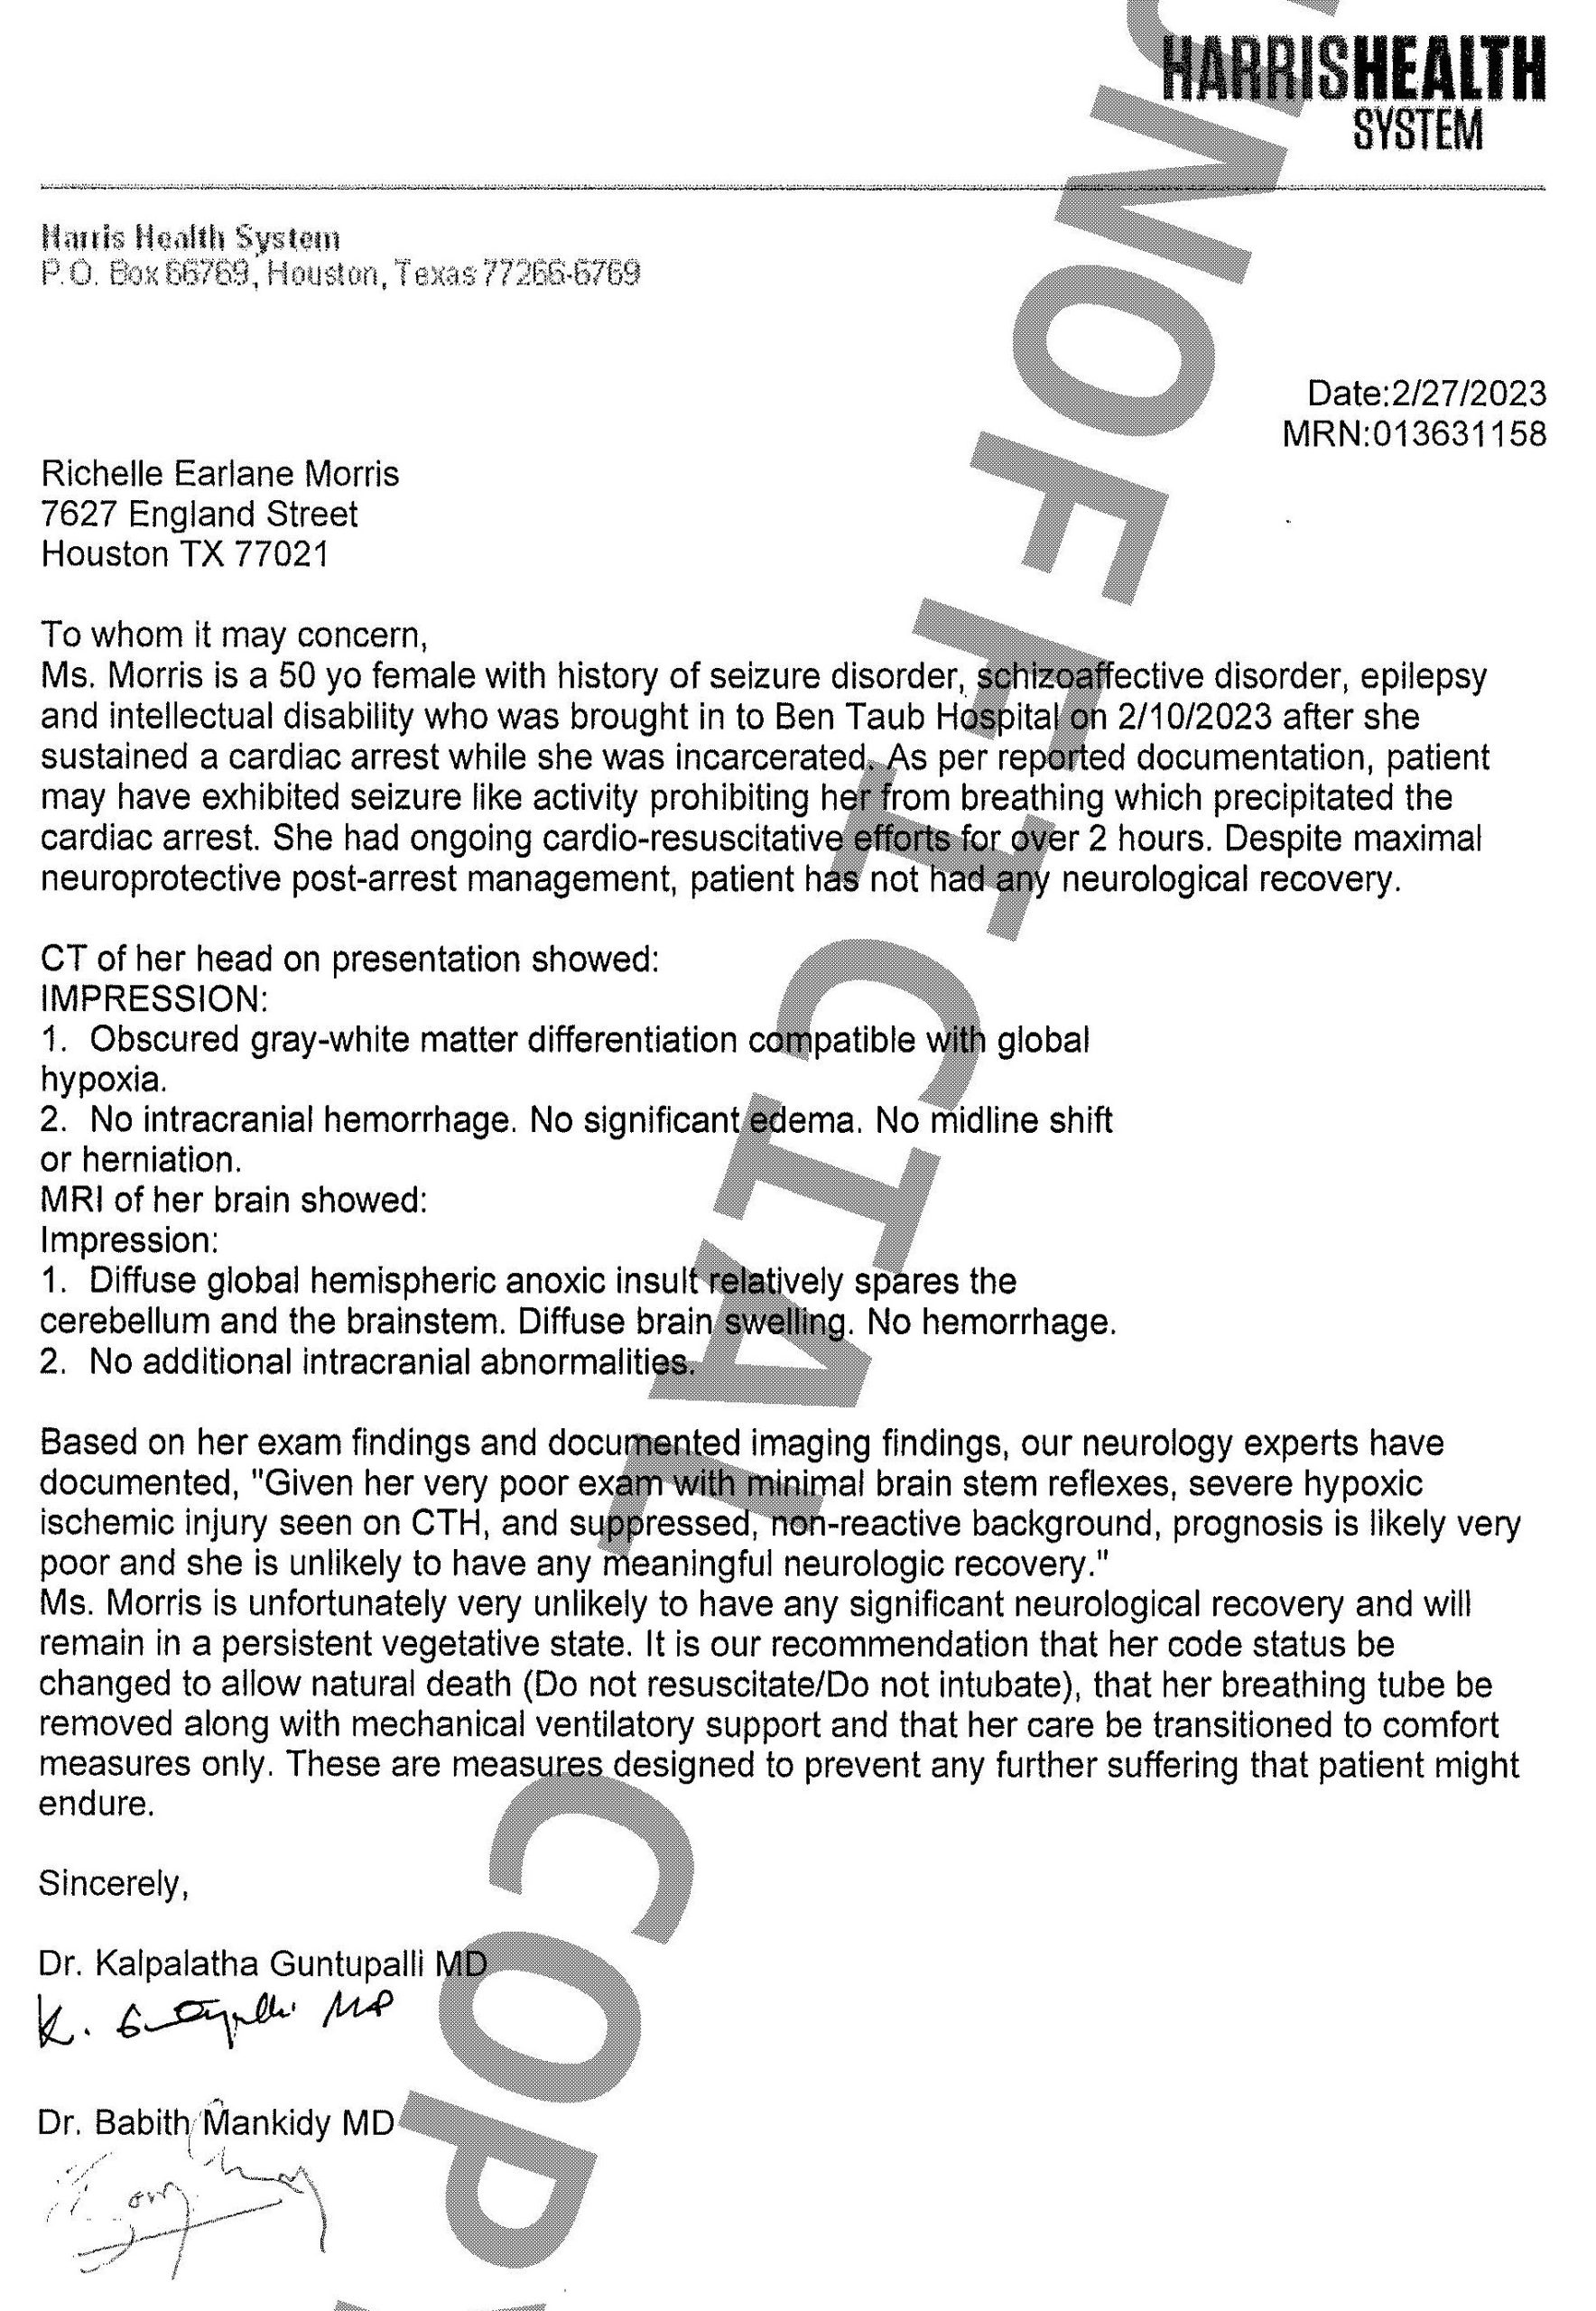 A letter submitted to a Harris County probate court from doctors who oversaw Richelle Morris' case in February. The doctors recommended that Richelle's breathing tube be removed because she was unlikely to recover.